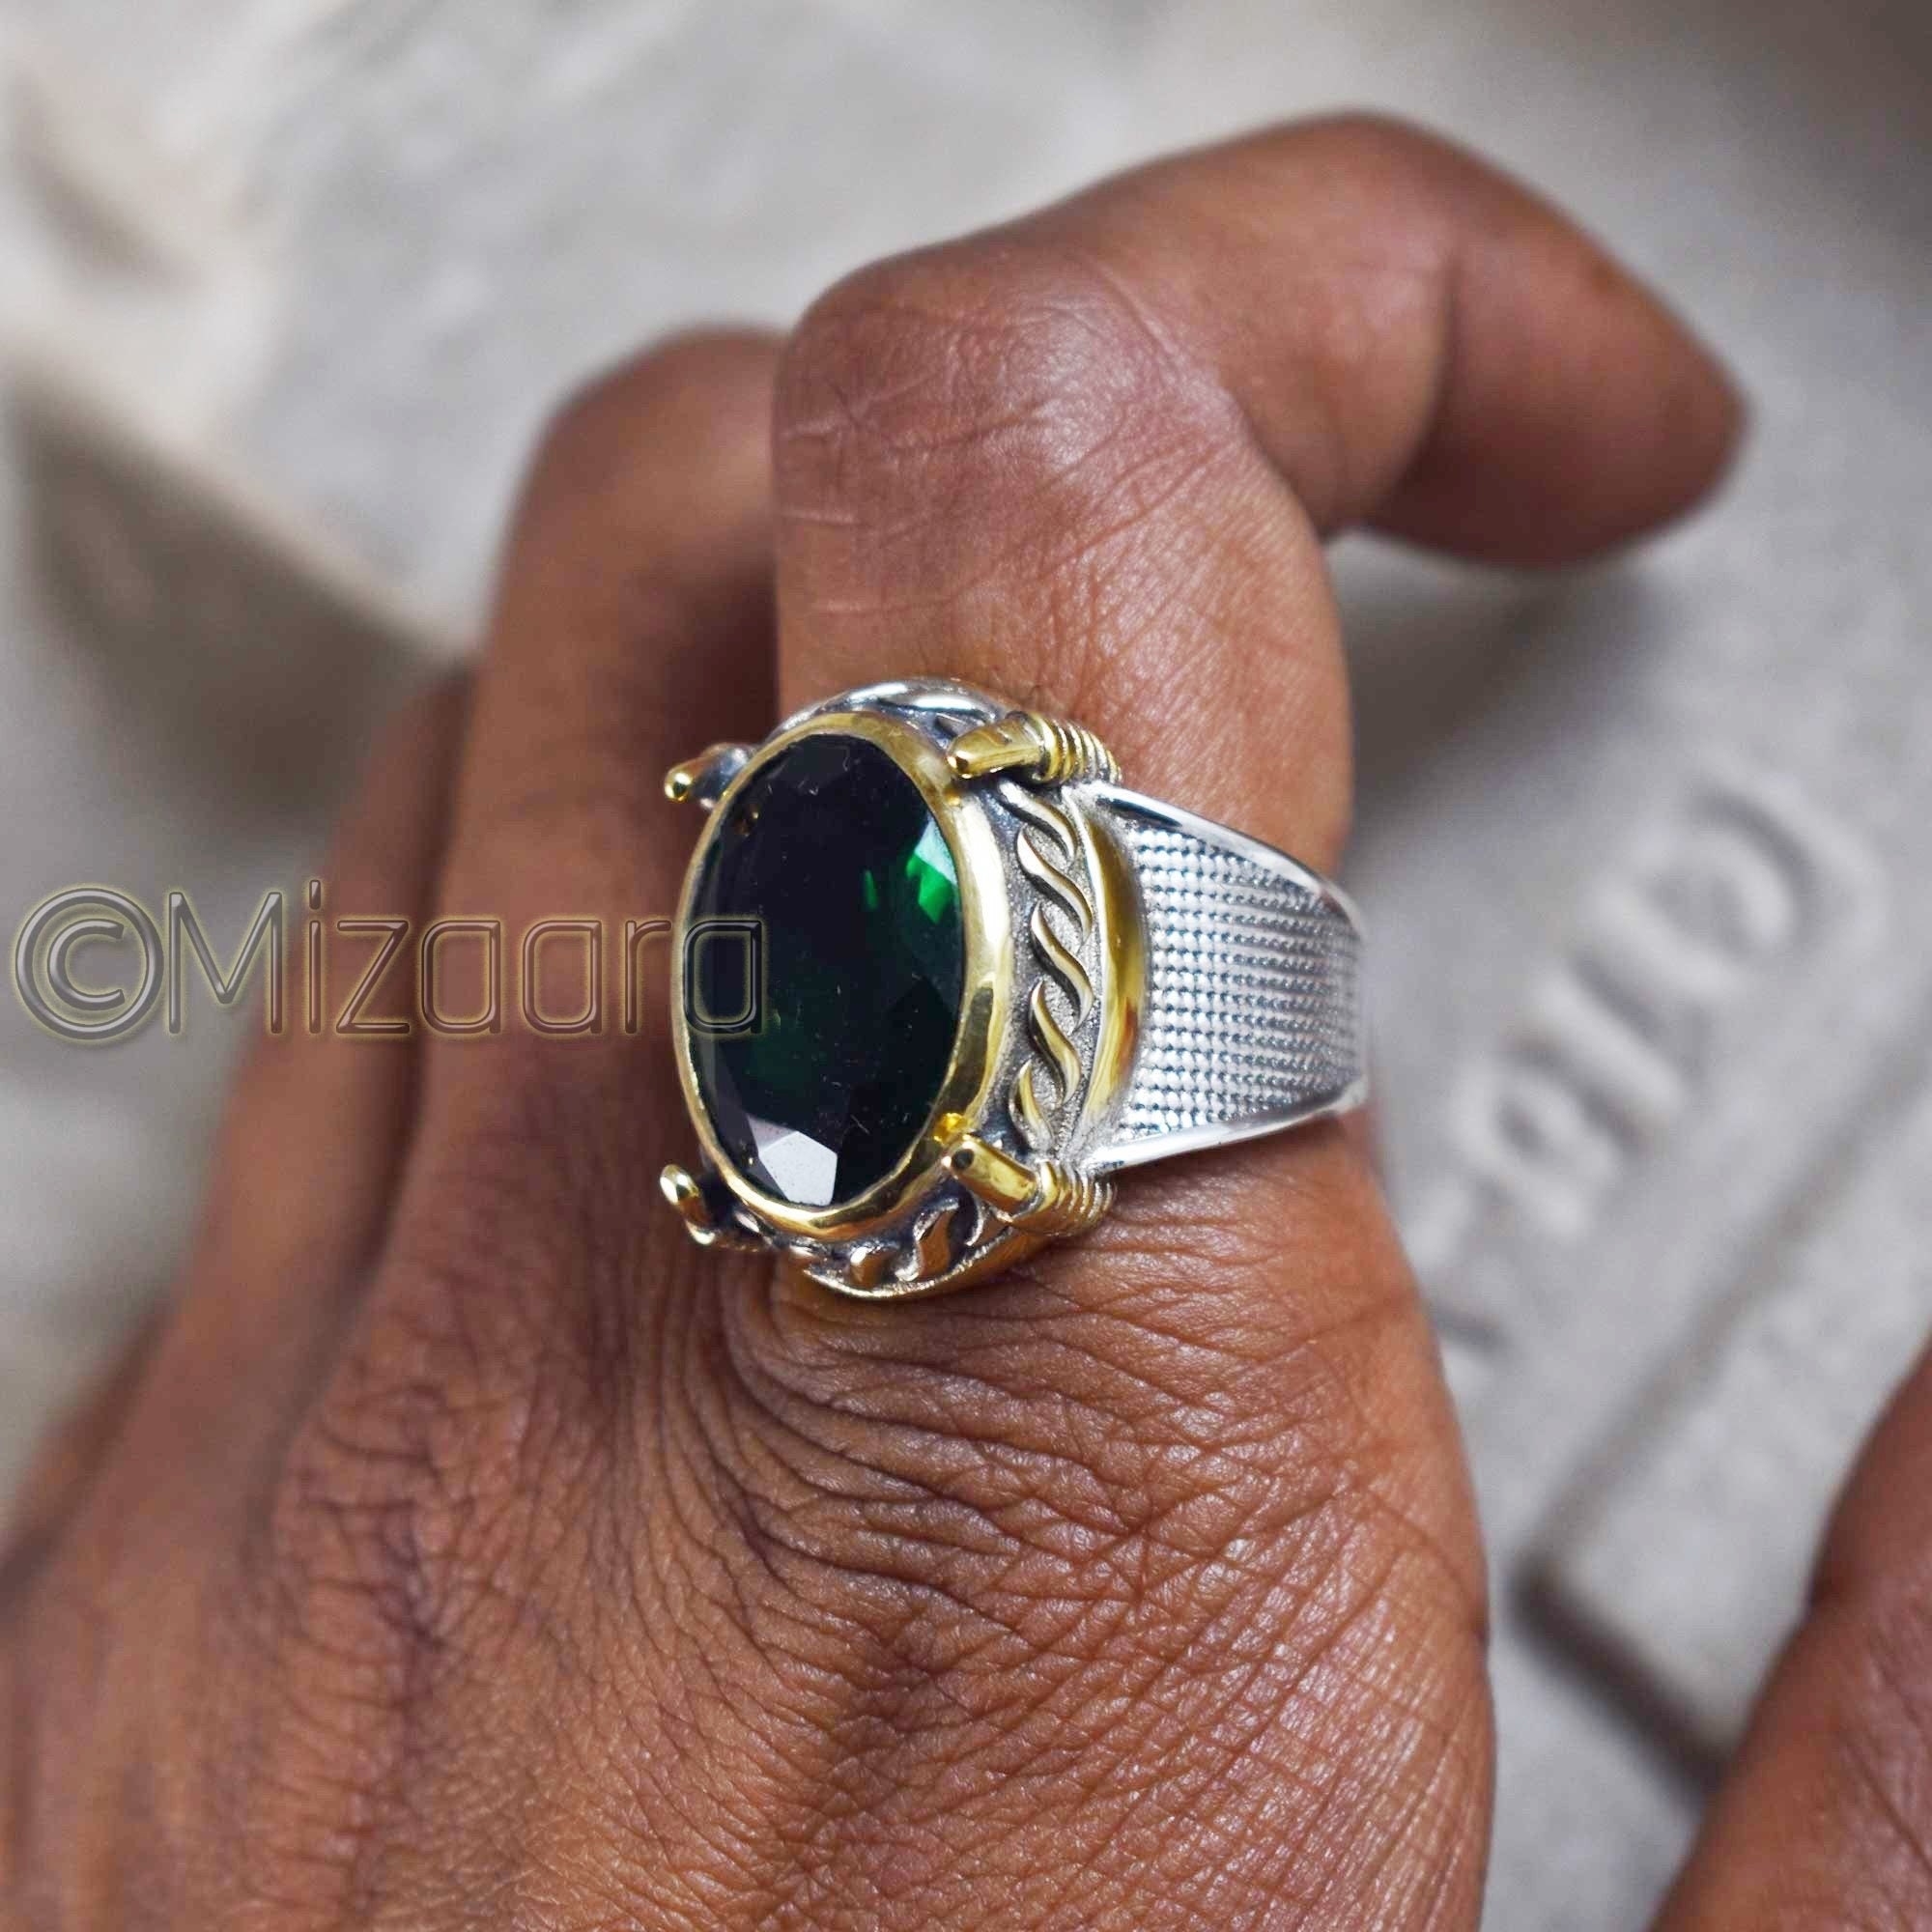 Emerald Silver Gold Ring, Hydro , Mix Metal, Massive Rope Design Gemstone Heavy Men's Gift For Bother, Funky